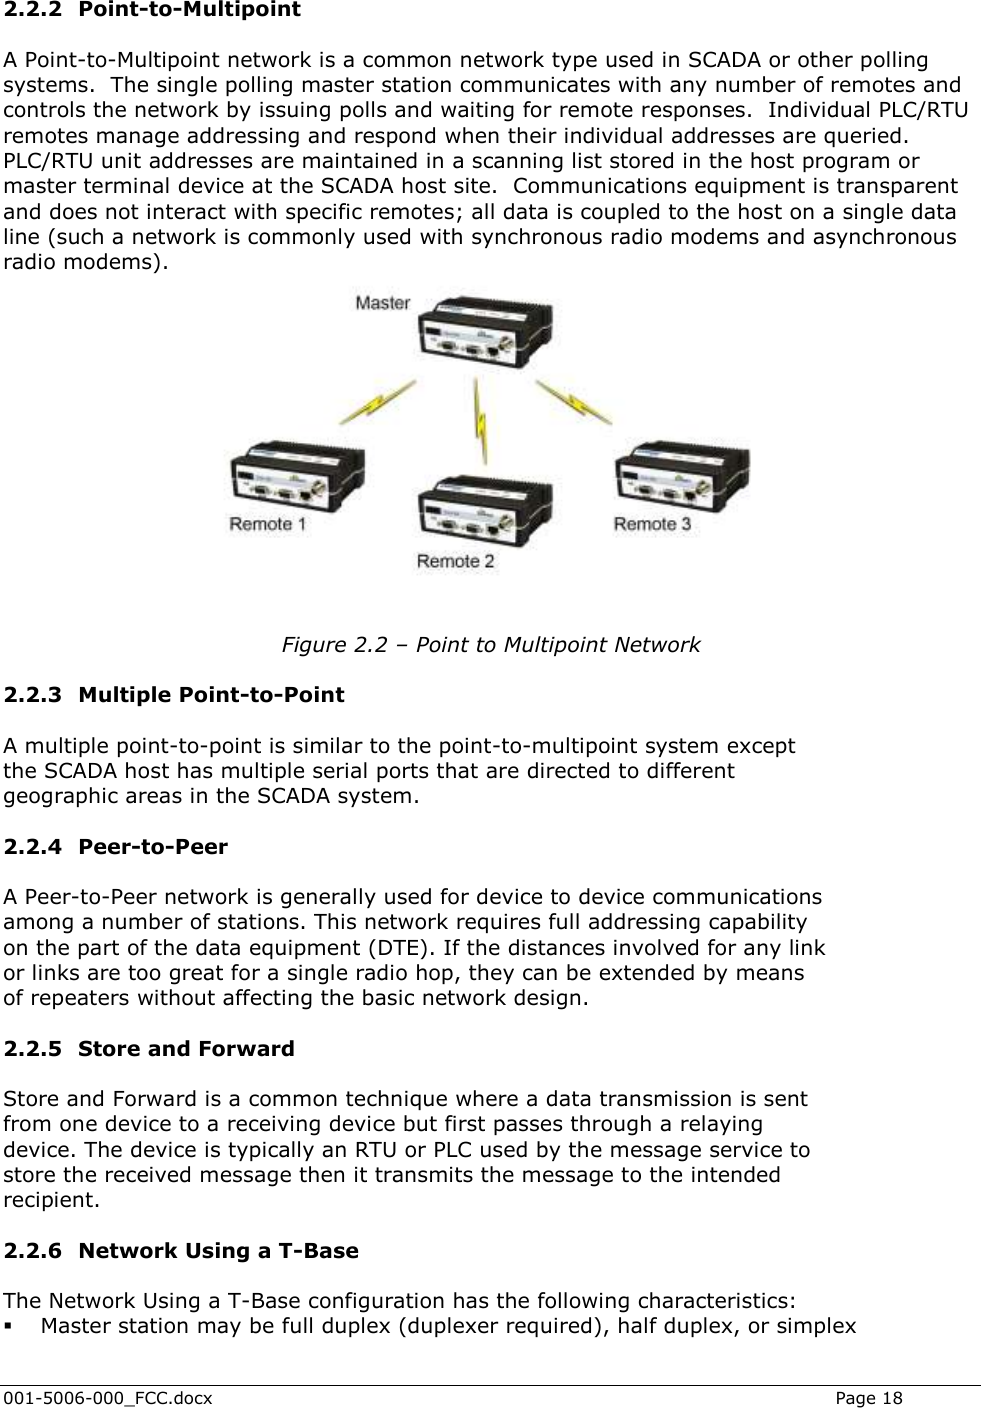  001-5006-000_FCC.docx    Page 18  2.2.2 Point-to-Multipoint A Point-to-Multipoint network is a common network type used in SCADA or other polling systems.  The single polling master station communicates with any number of remotes and controls the network by issuing polls and waiting for remote responses.  Individual PLC/RTU remotes manage addressing and respond when their individual addresses are queried. PLC/RTU unit addresses are maintained in a scanning list stored in the host program or master terminal device at the SCADA host site.  Communications equipment is transparent and does not interact with specific remotes; all data is coupled to the host on a single data line (such a network is commonly used with synchronous radio modems and asynchronous radio modems).   Figure 2.2 – Point to Multipoint Network  2.2.3 Multiple Point-to-Point A multiple point-to-point is similar to the point-to-multipoint system except the SCADA host has multiple serial ports that are directed to different geographic areas in the SCADA system. 2.2.4 Peer-to-Peer A Peer-to-Peer network is generally used for device to device communications among a number of stations. This network requires full addressing capability on the part of the data equipment (DTE). If the distances involved for any link or links are too great for a single radio hop, they can be extended by means of repeaters without affecting the basic network design. 2.2.5 Store and Forward Store and Forward is a common technique where a data transmission is sent from one device to a receiving device but first passes through a relaying device. The device is typically an RTU or PLC used by the message service to store the received message then it transmits the message to the intended recipient. 2.2.6 Network Using a T-Base The Network Using a T-Base configuration has the following characteristics:  Master station may be full duplex (duplexer required), half duplex, or simplex 